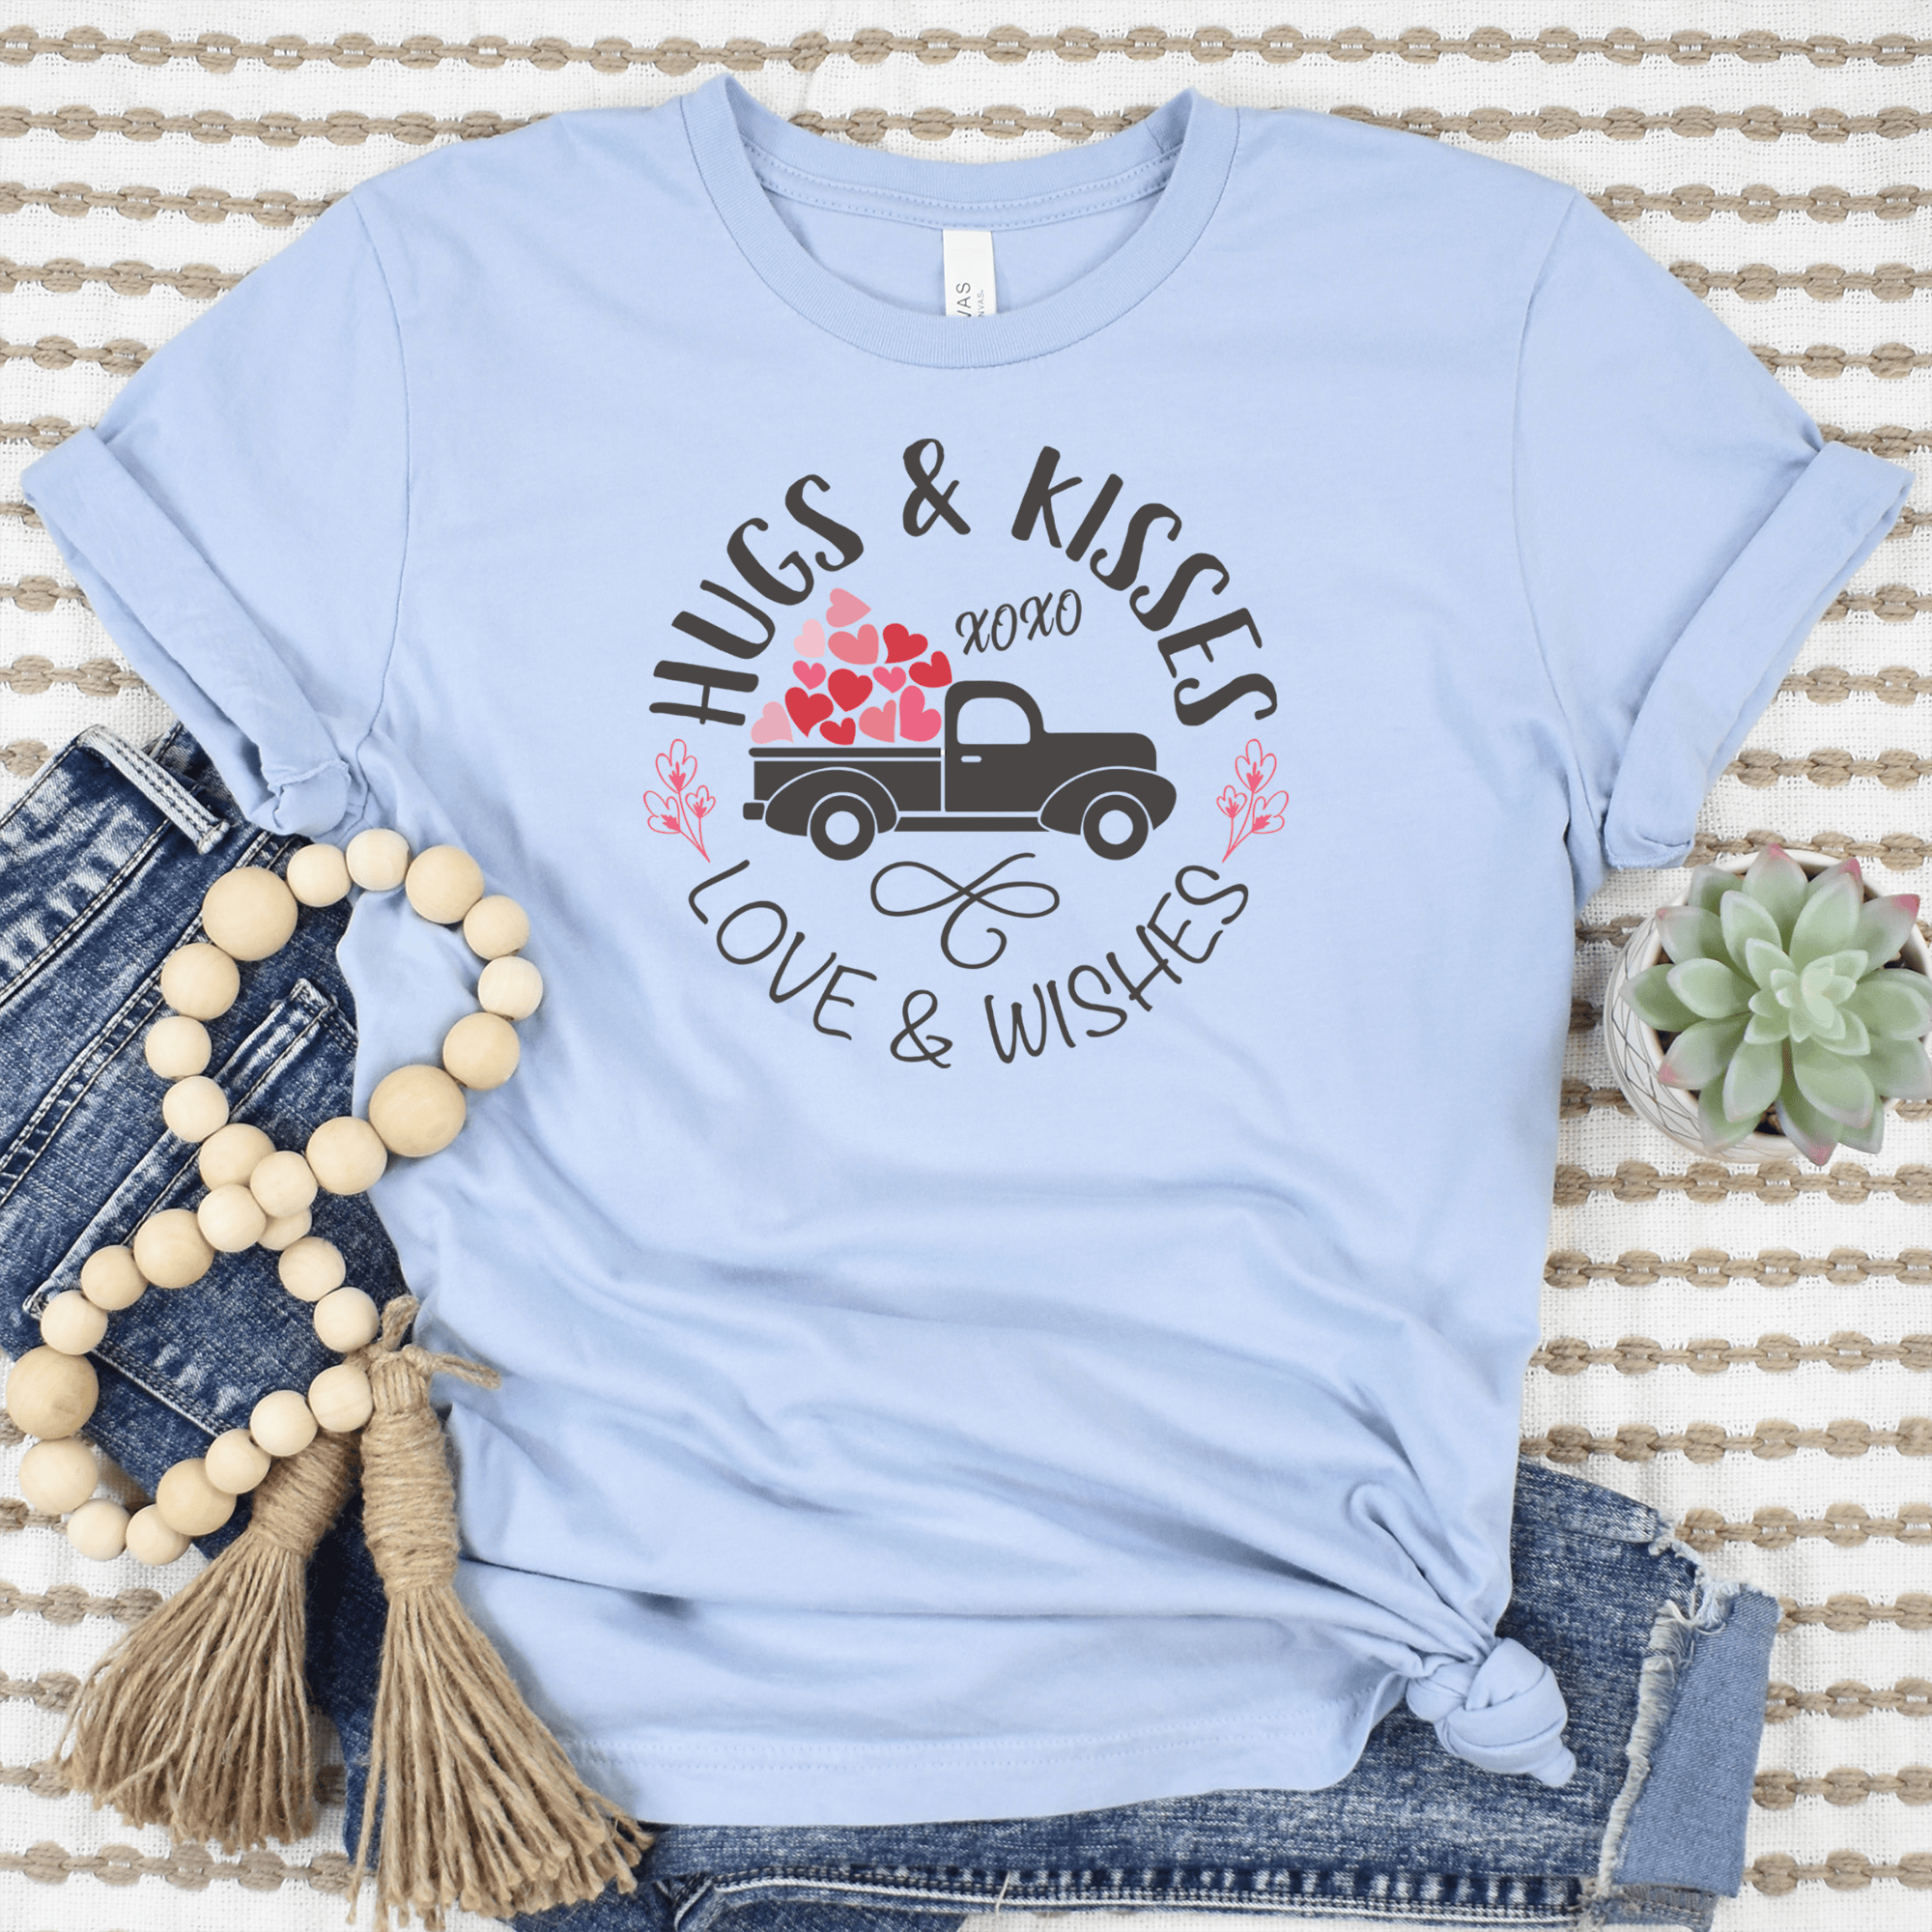 Light Blue Womens T-Shirt With Hugs Kisses Lovers Wishses Design